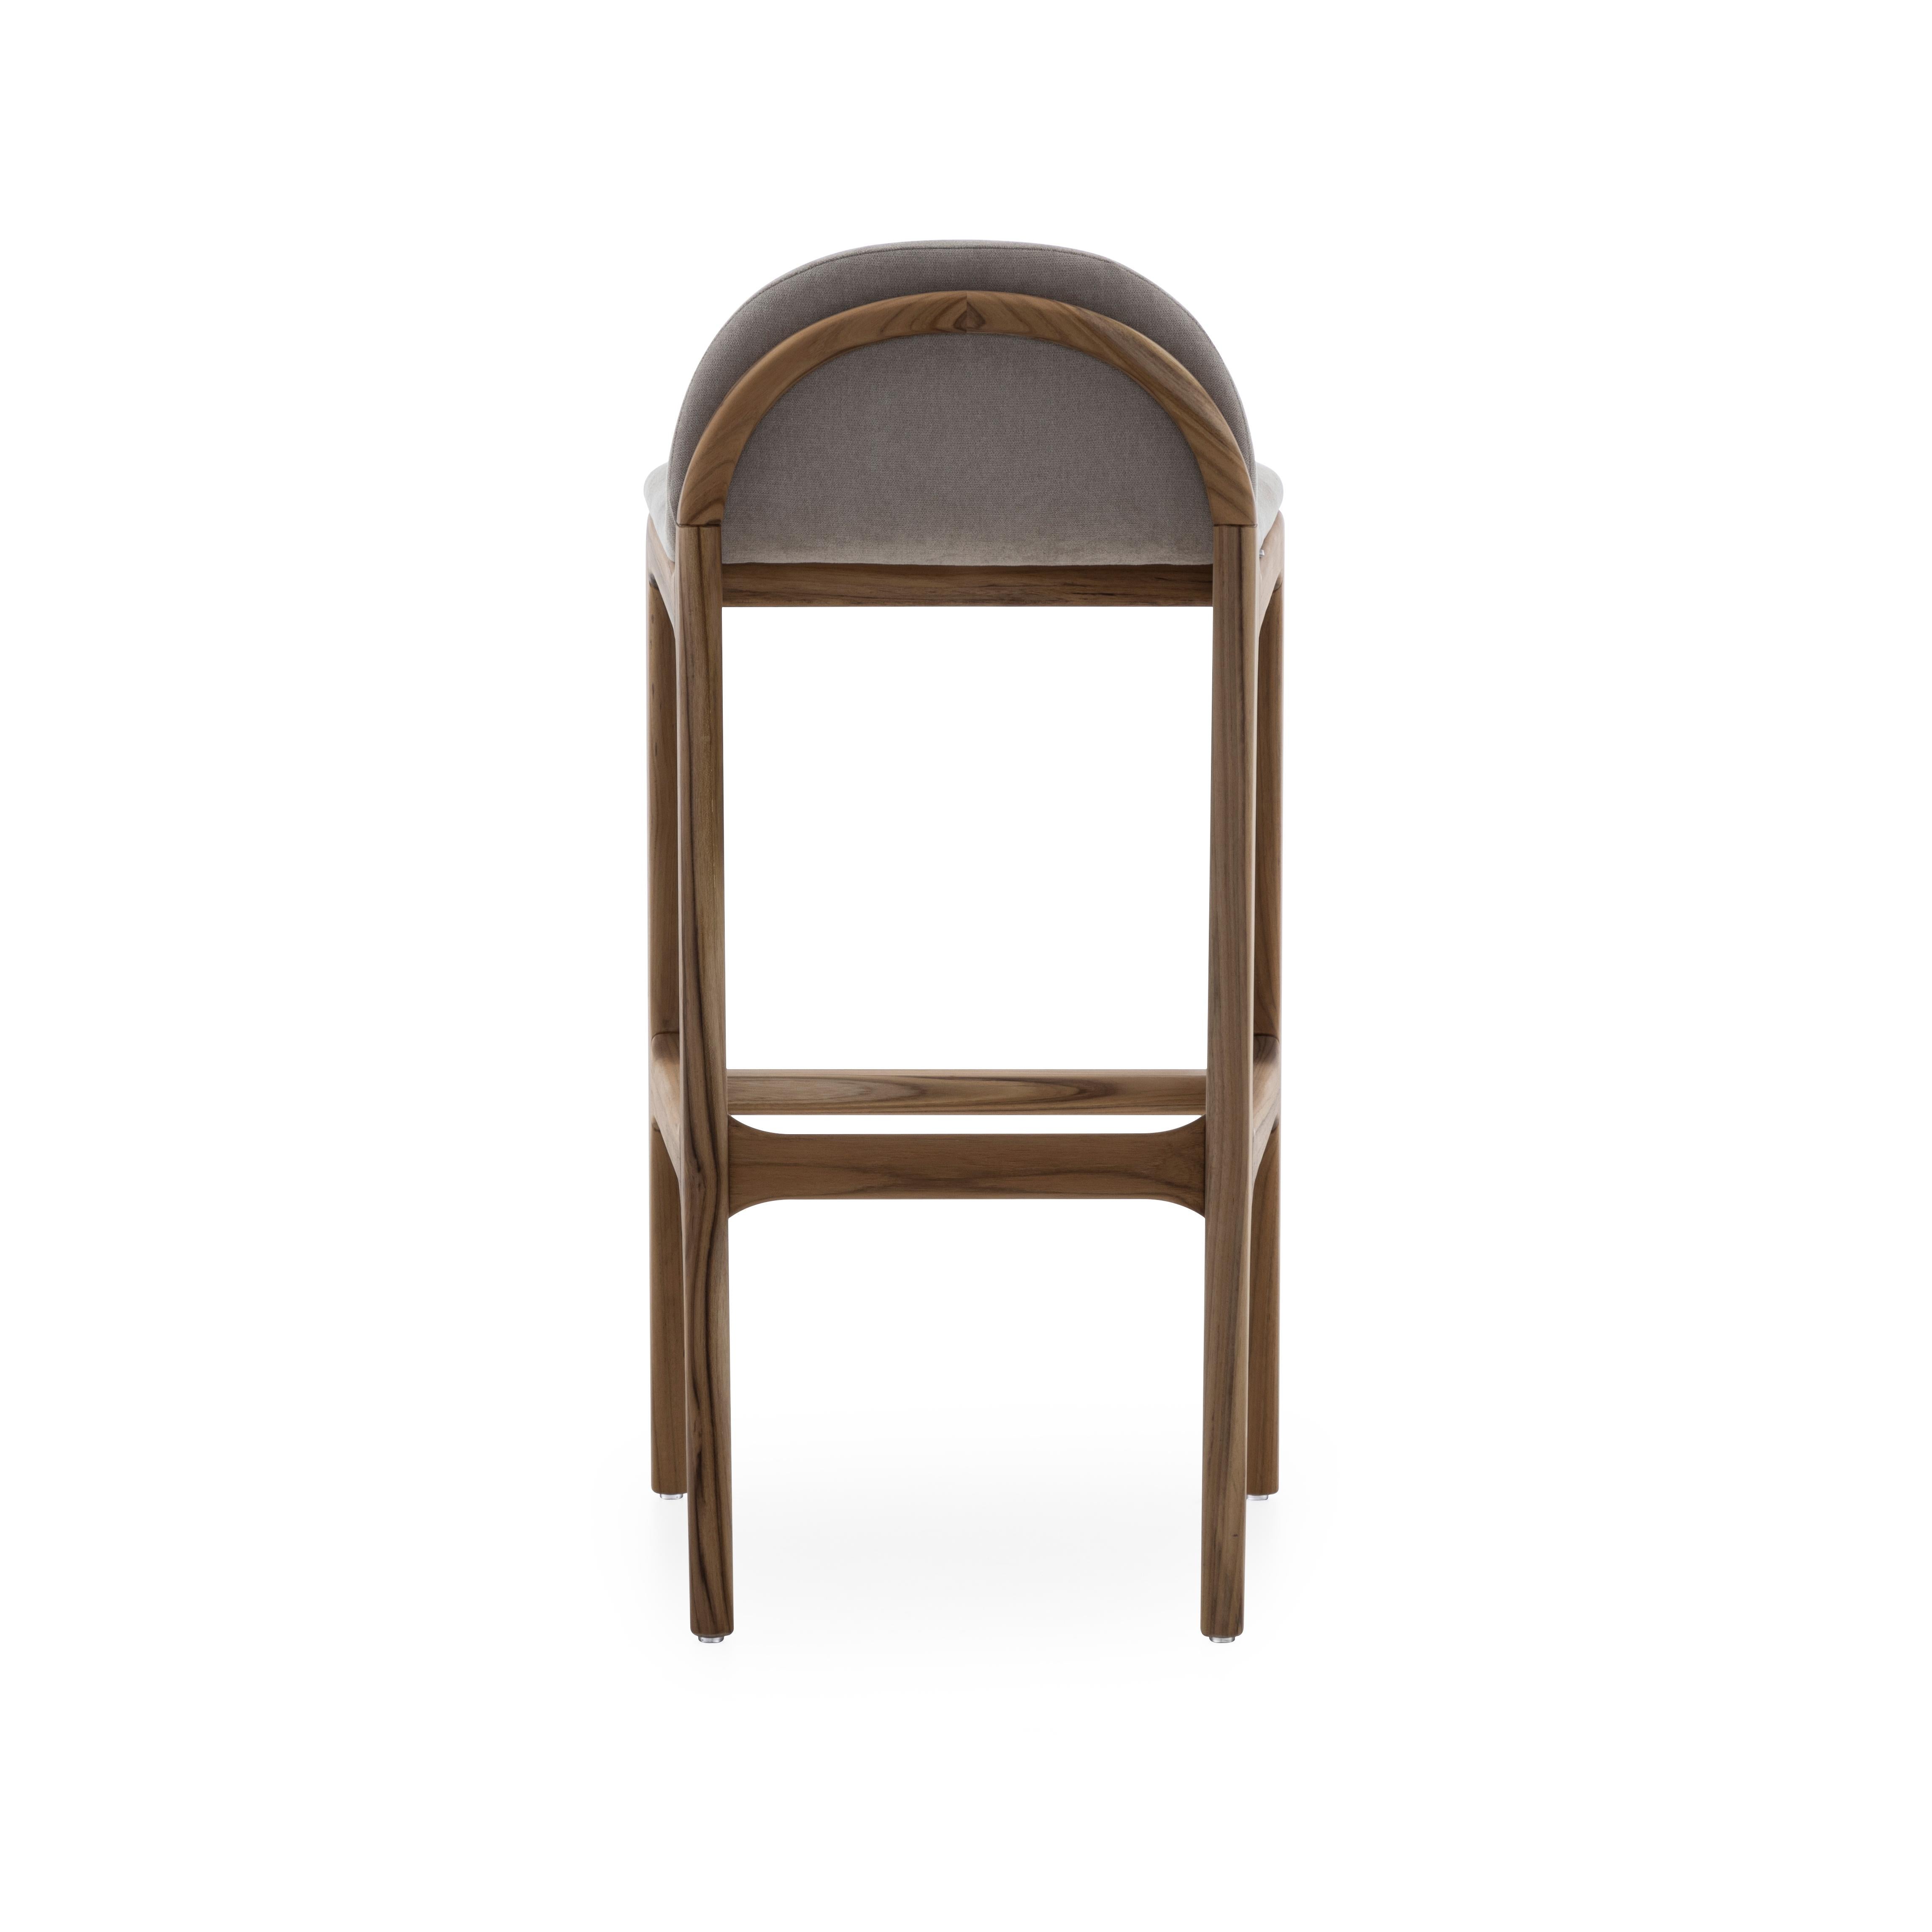 Brazilian Ura Counter Stool in Teak Wood Finish Base and Upholstered Light Grey Seat For Sale